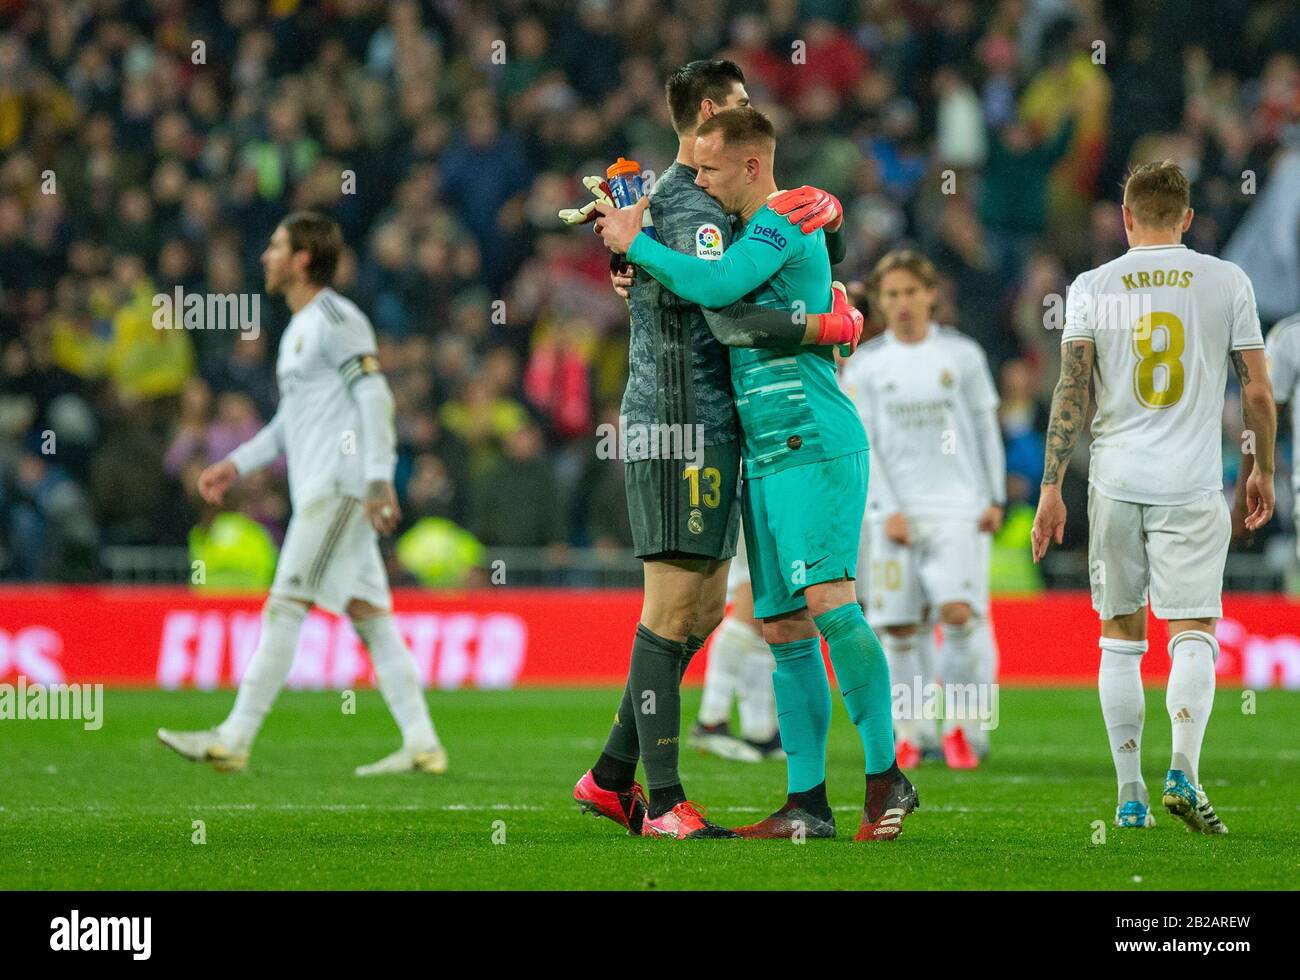 Tibaut Courtois and Ter Stegen of Real Madrid celebrates after the Spanish La Liga match round 26 between Real Madrid and FC Barcelona at Santiago Bernabeu Stadium in Madrid.Final score: Real Madrid 2-0 Barcelona. Stock Photo